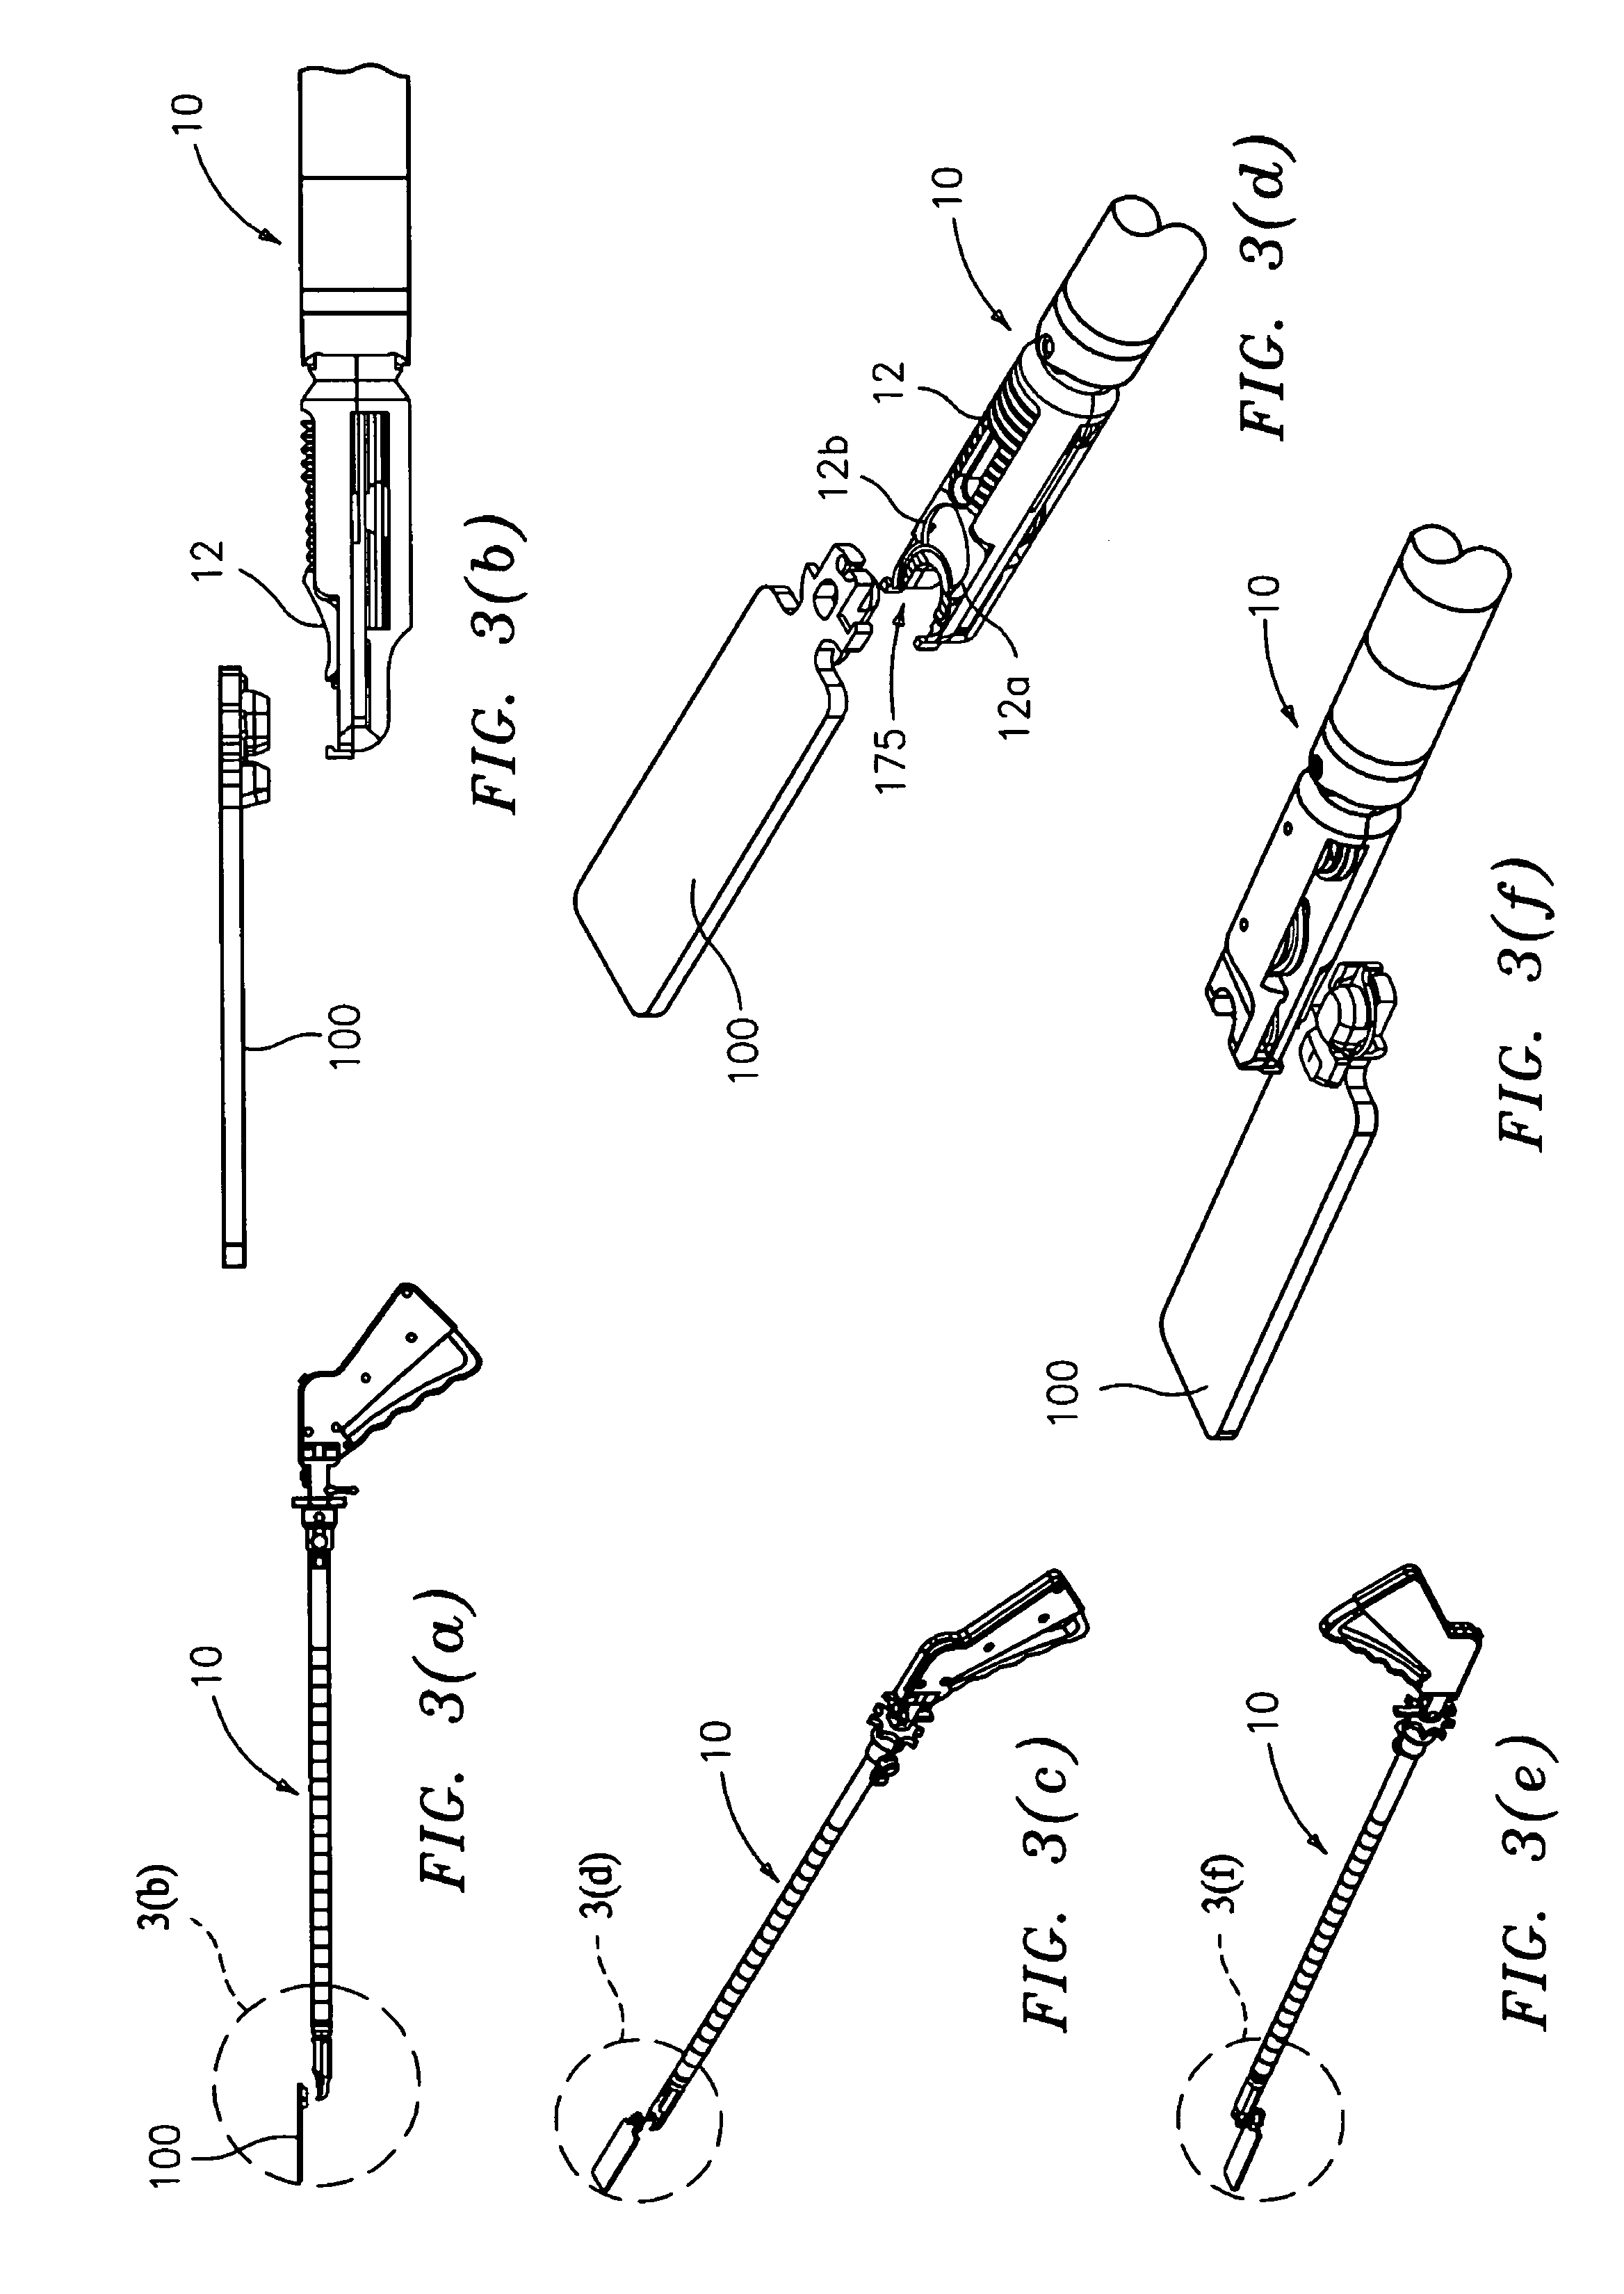 Apparatus and method for minimally invasive suturing